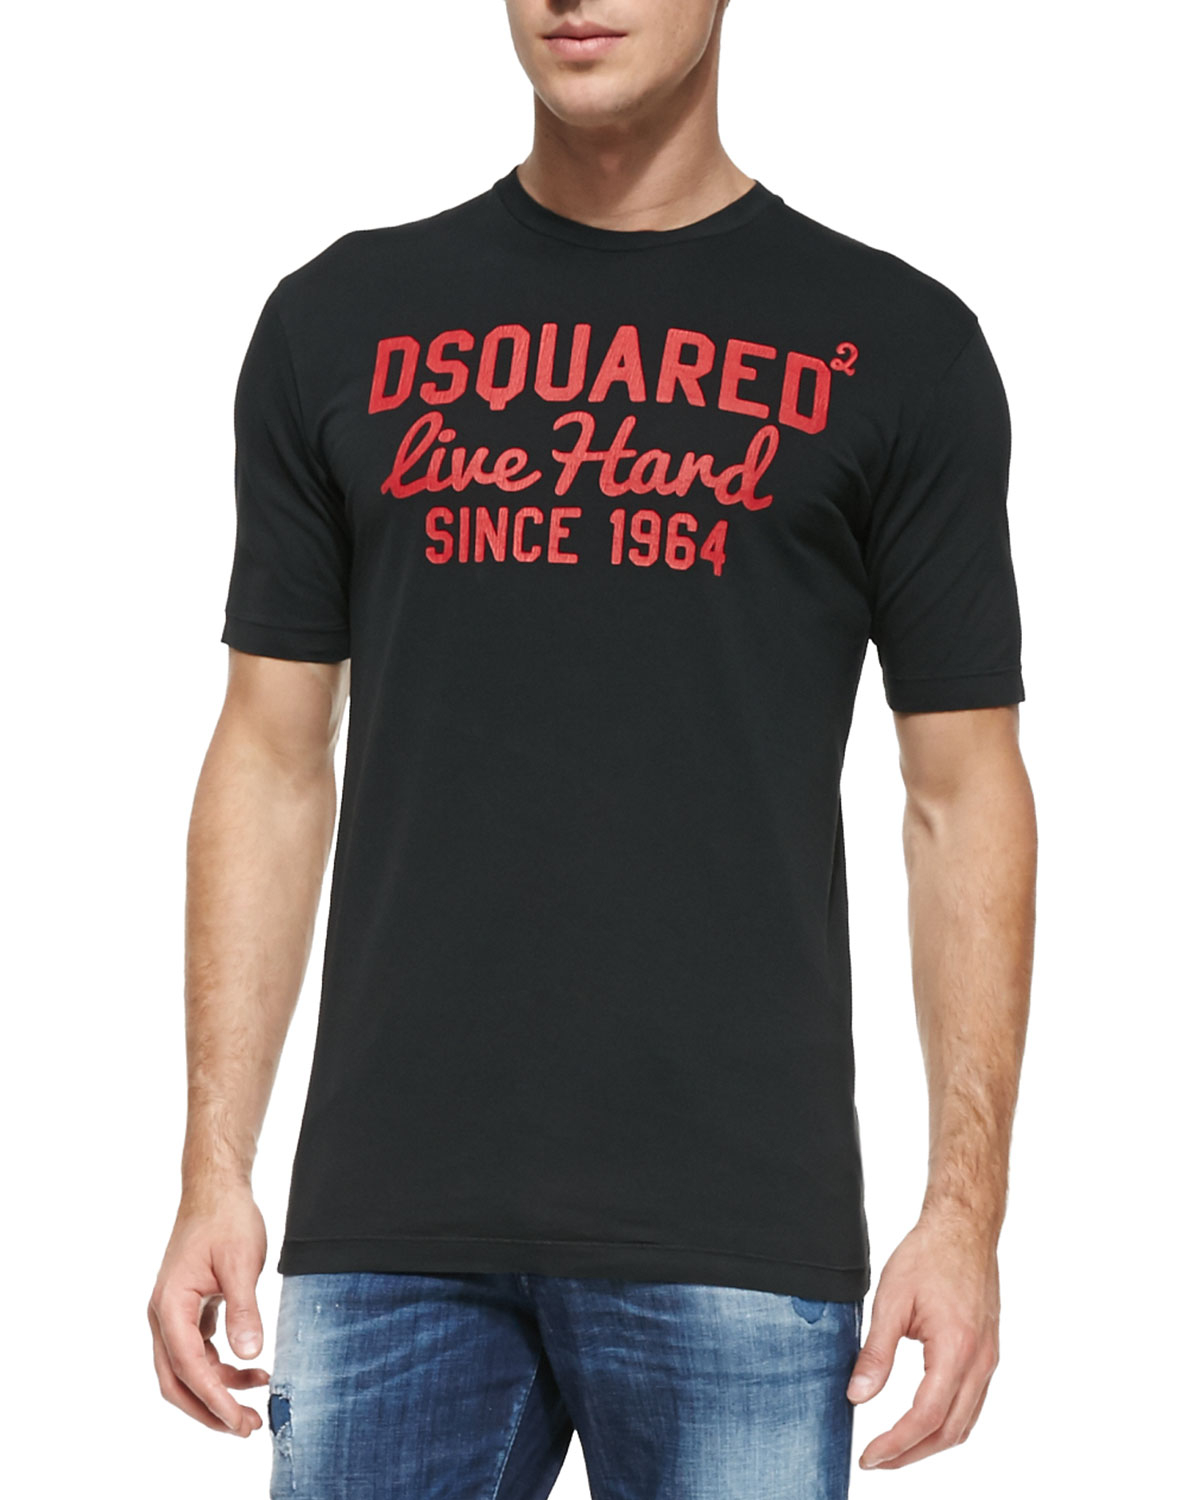 dsquared since 1964